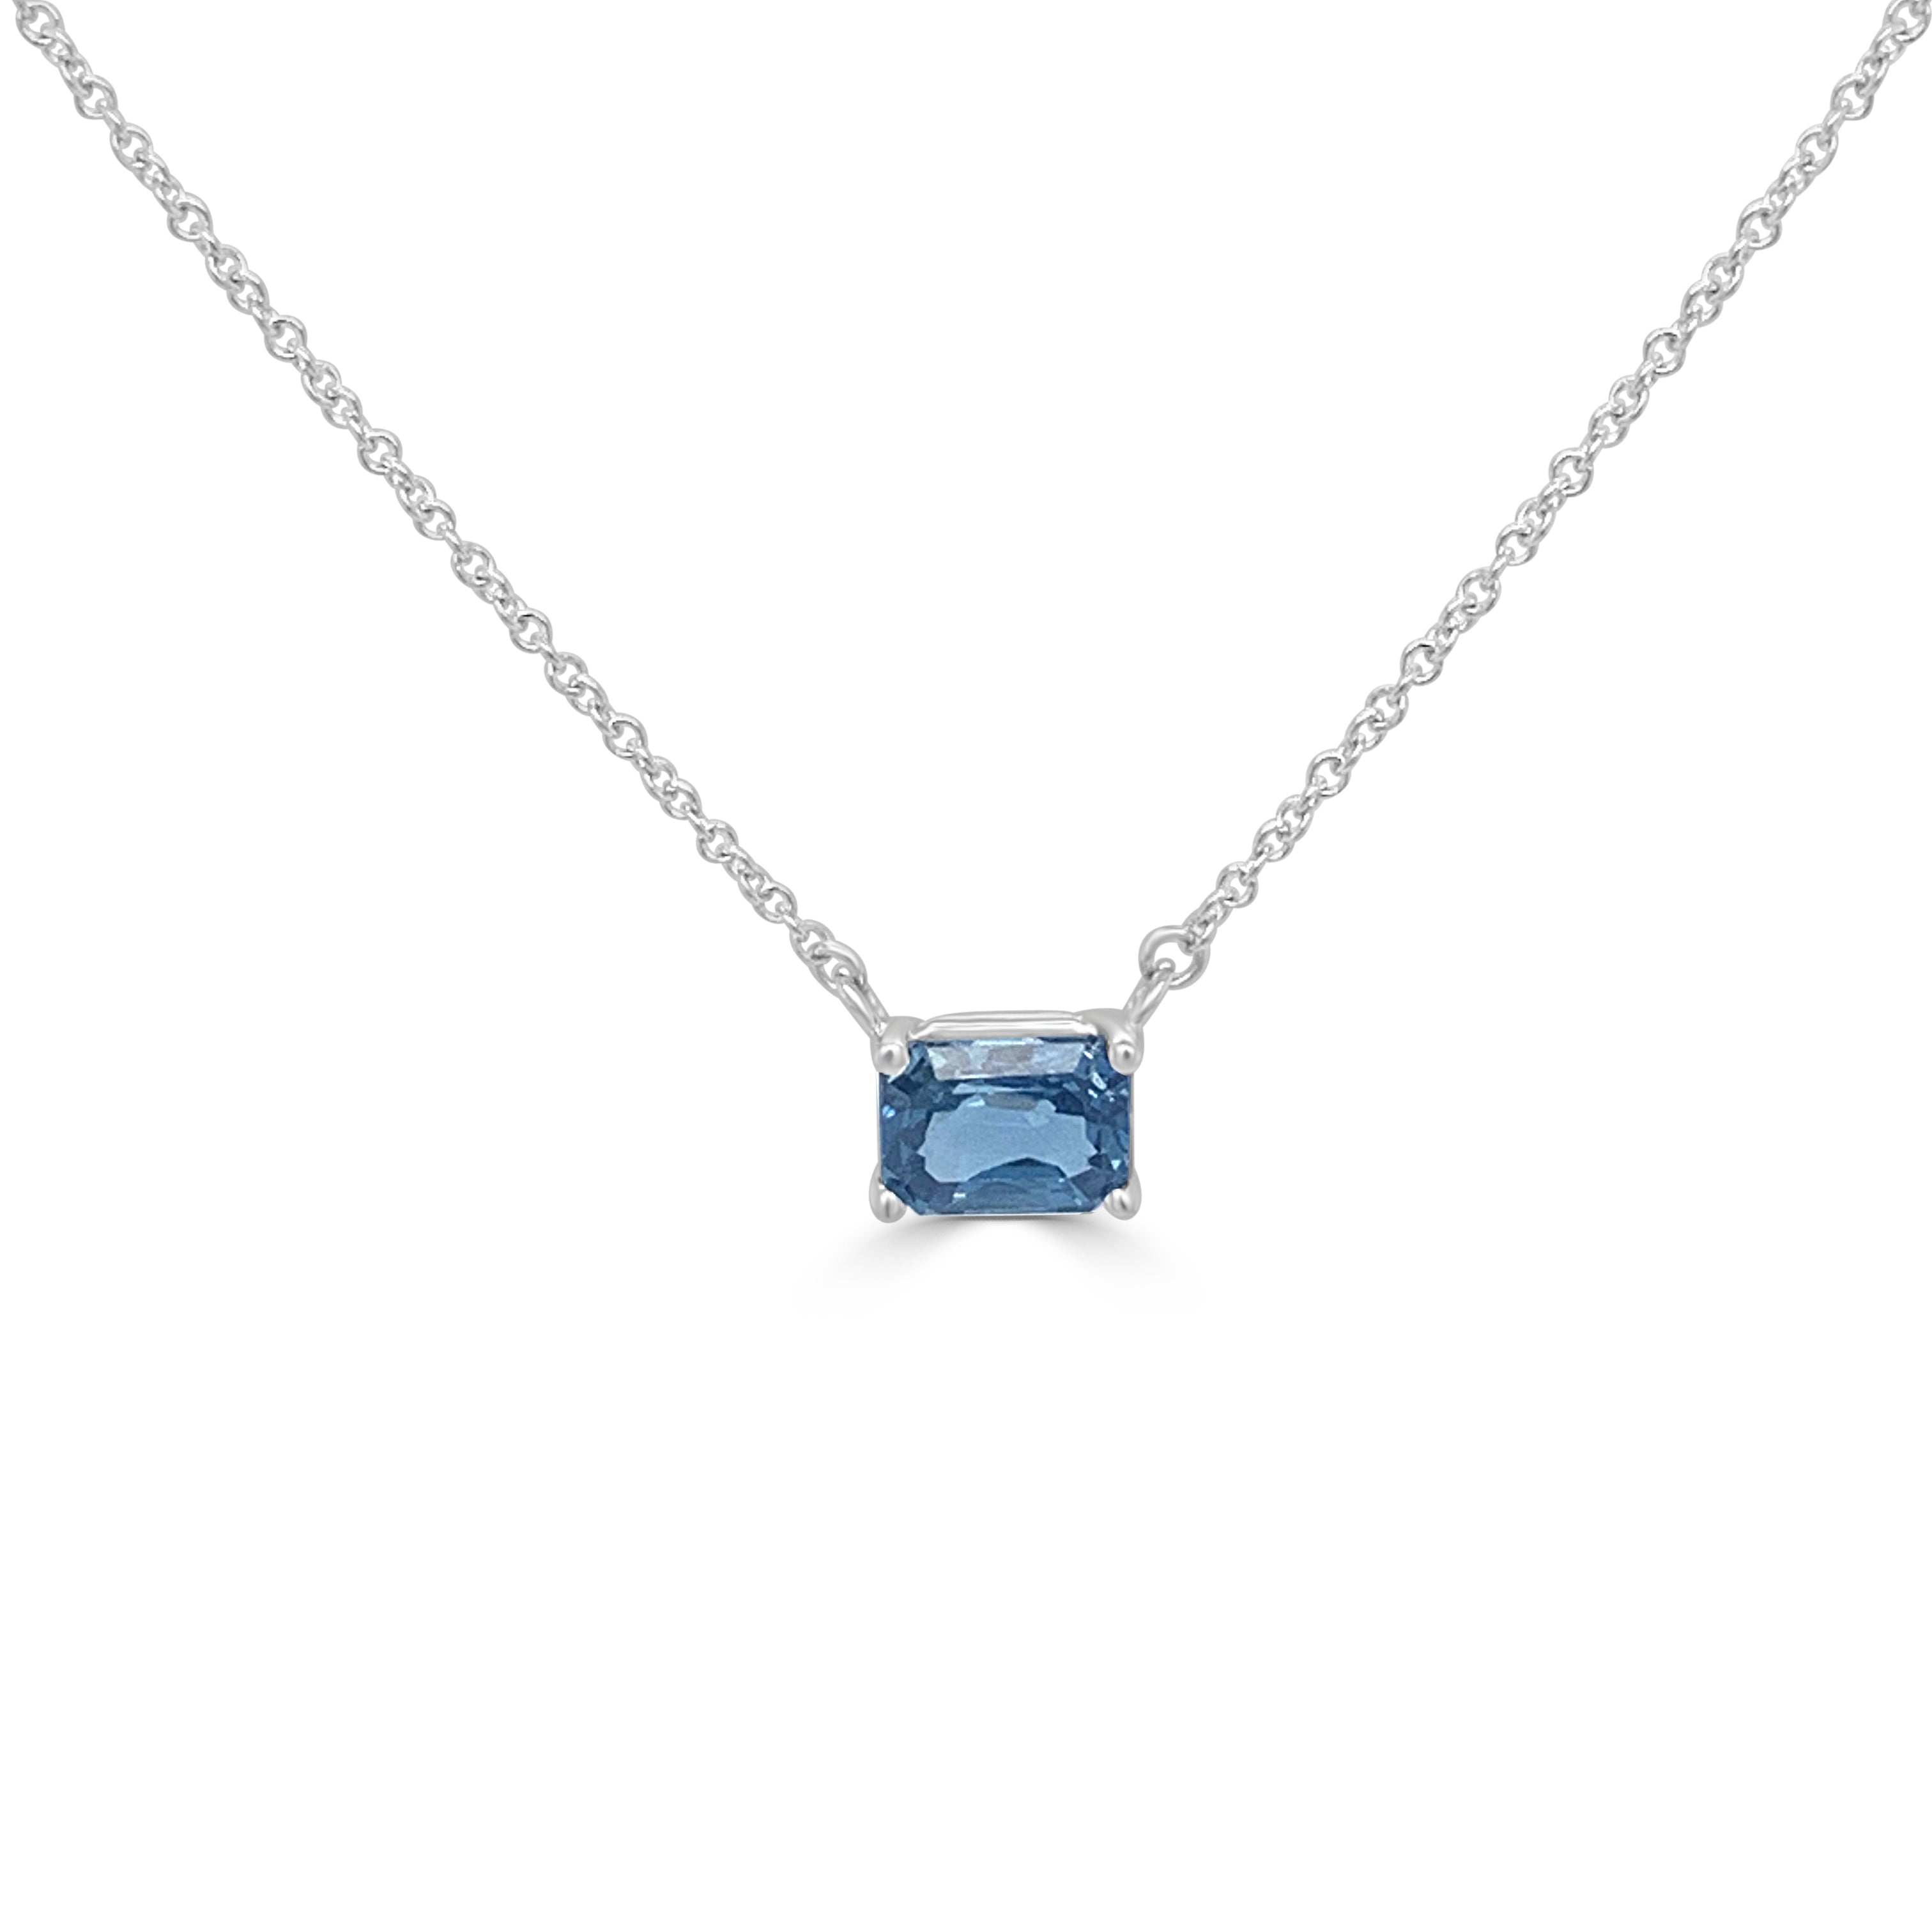 14k Gold & Sapphire Necklace - 1.09ct